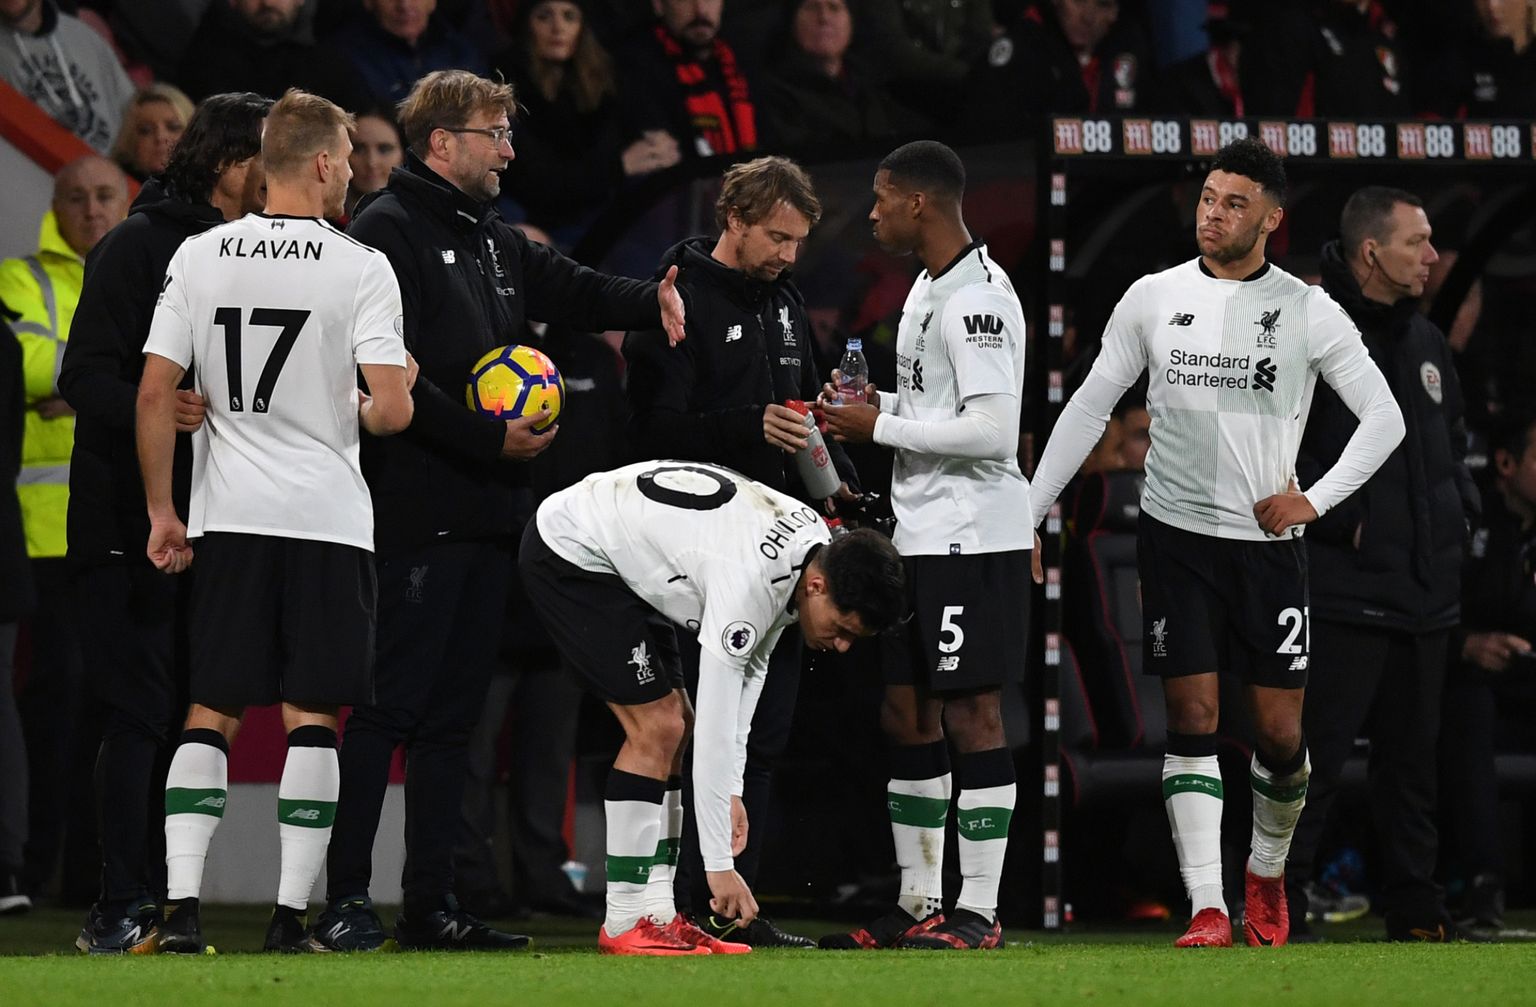 Soccer Football - Premier League - AFC Bournemouth vs Liverpool - Vitality Stadium, Bournemouth, Britain - December 17, 2017   Liverpool manager Juergen Klopp gives instructions to Ragnar Klavan, Philippe Coutinho, Georginio Wijnaldum and Alex Oxlade-Chamberlain during a break in play   REUTERS/Dylan Martinez    EDITORIAL USE ONLY. No use with unauthorized audio, video, data, fixture lists, club/league logos or "live" services. Online in-match use limited to 75 images, no video emulation. No use in betting, games or single club/league/player publications.  Please contact your account representative for further details.